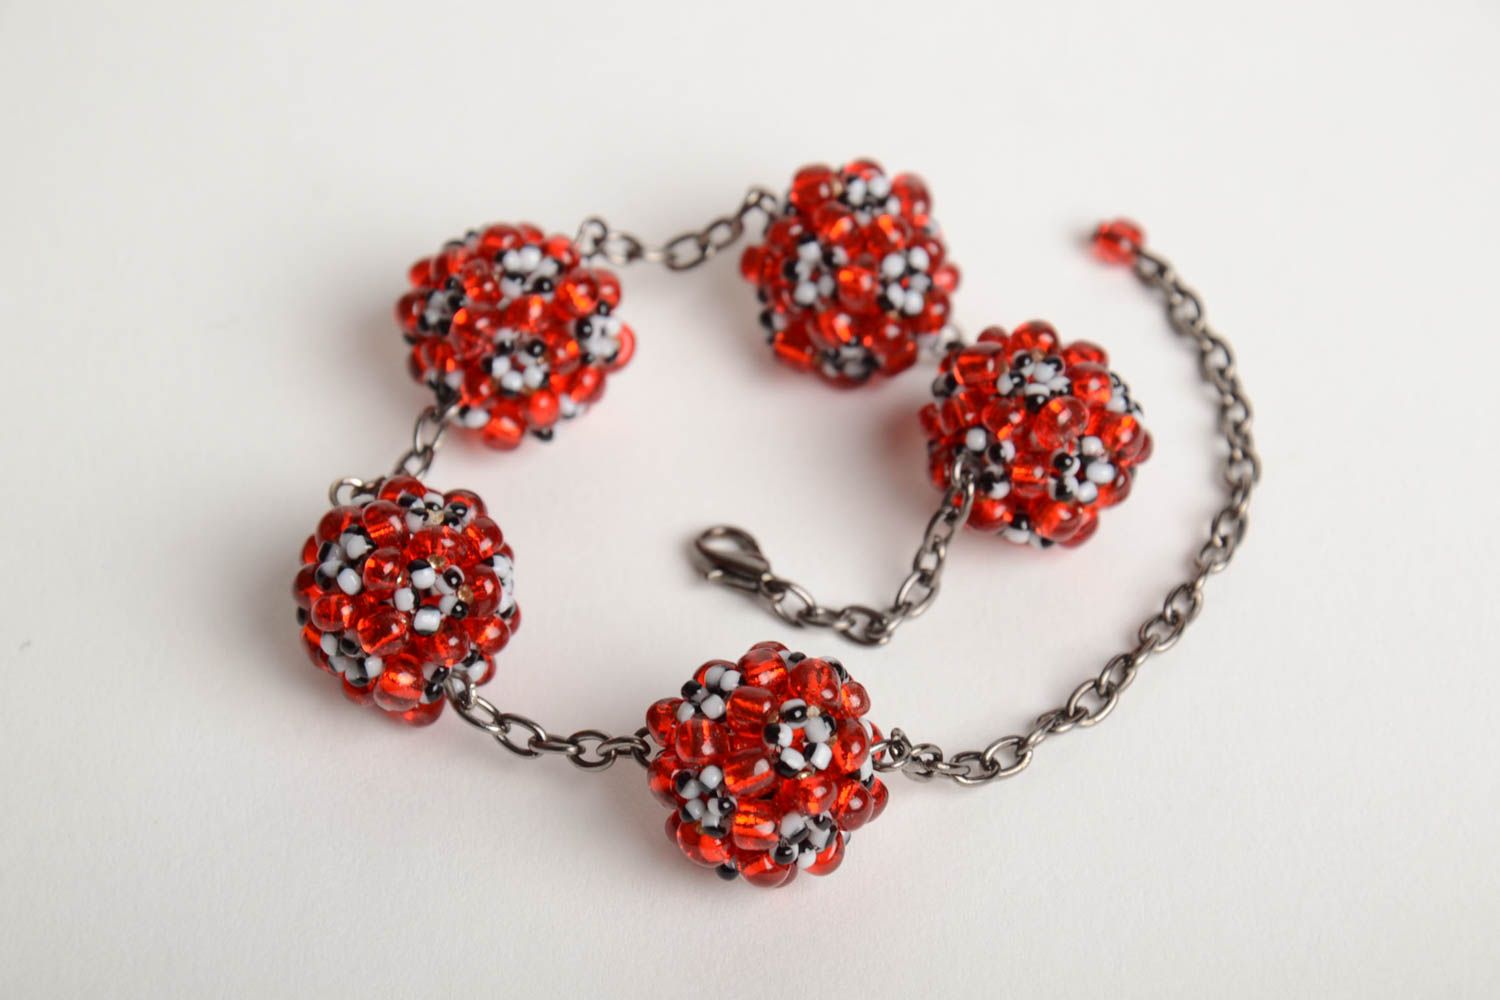 Handmade metal chain women's wrist bracelet with red and white bead woven balls photo 5